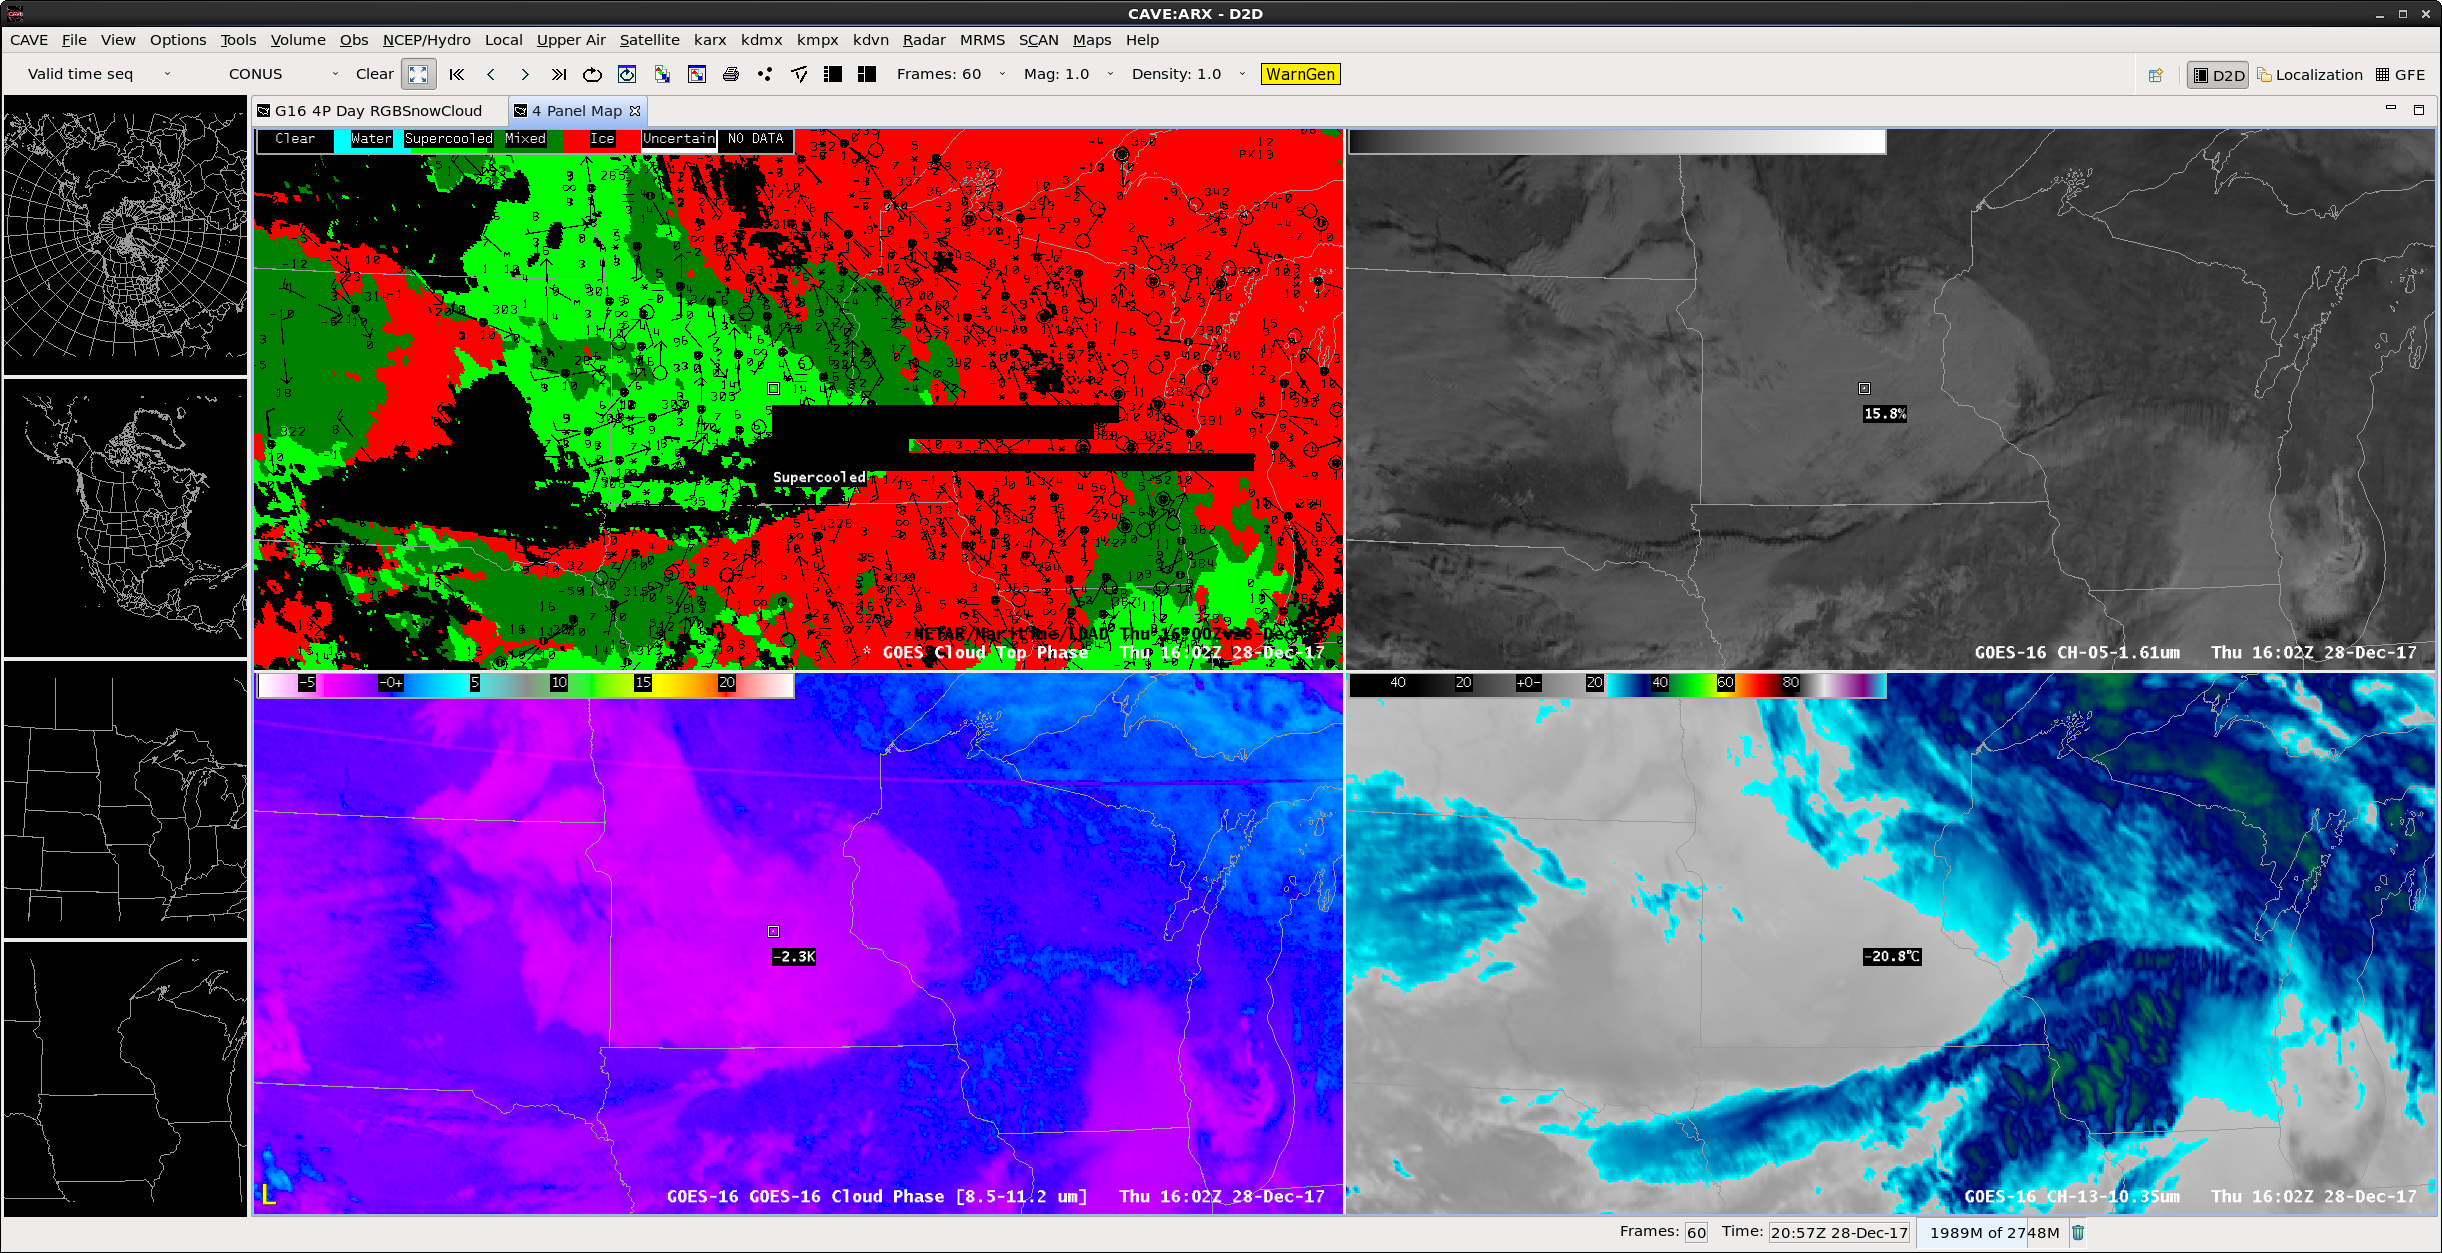 AWIPS screen capture of GOES-16 Cloud Top Phase (top left), Near-Infrared 